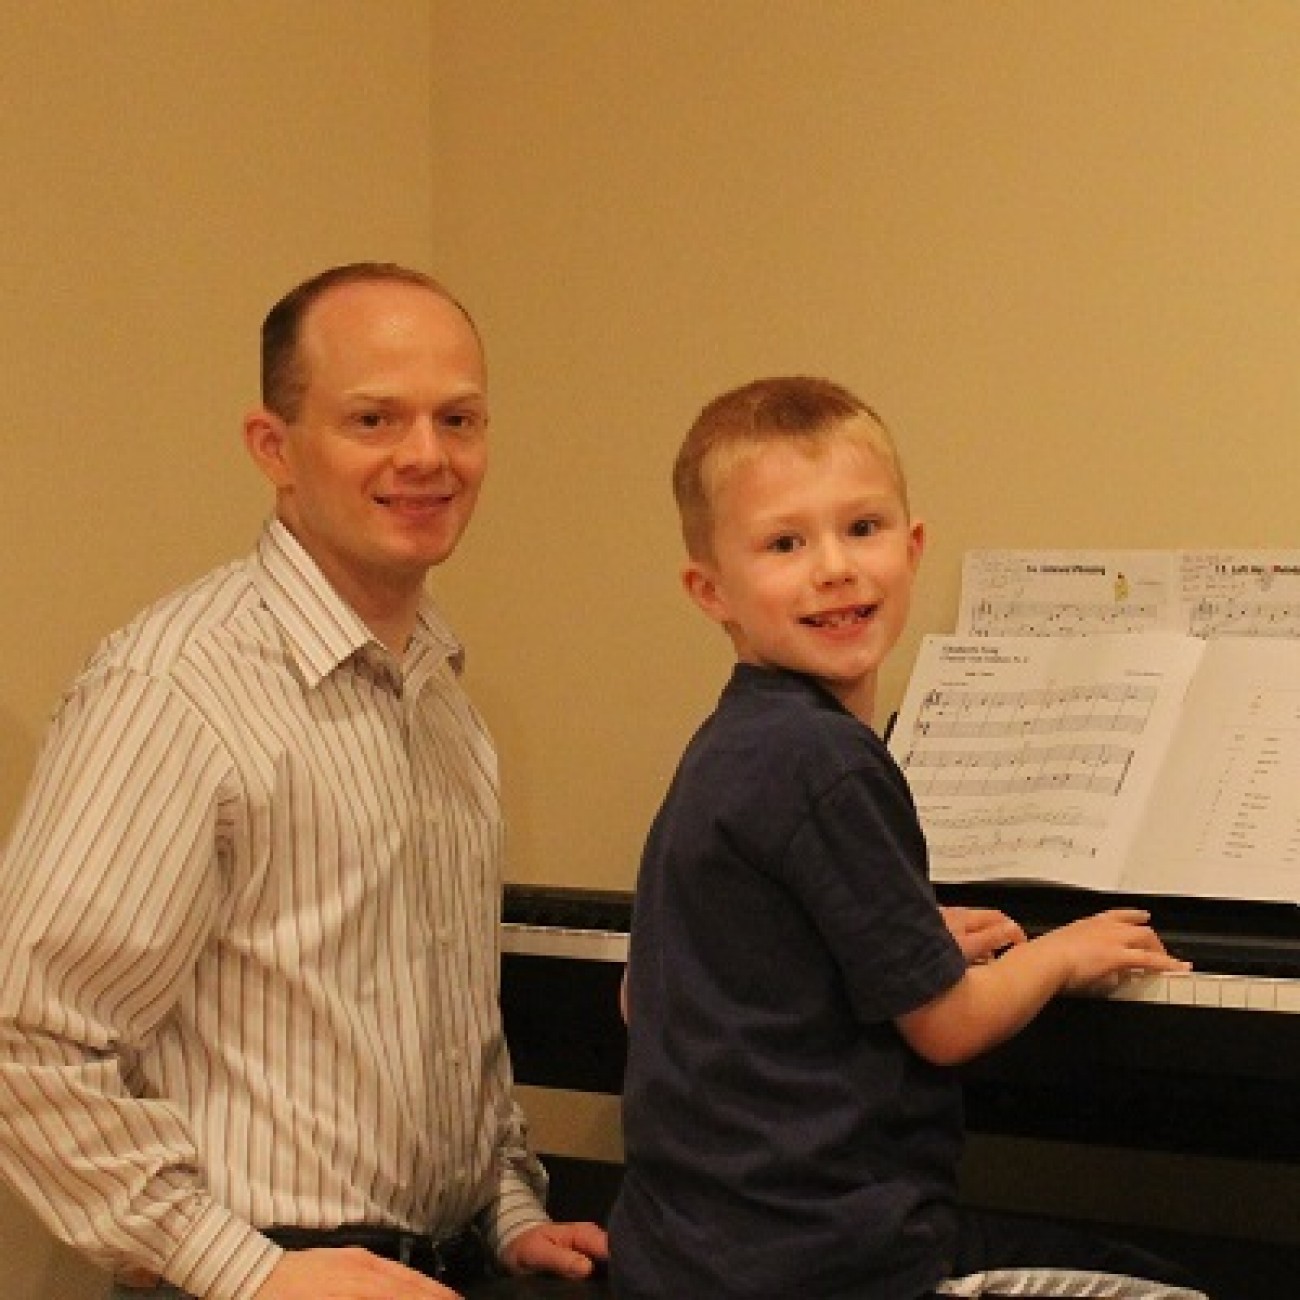 ab-finfam-Chase-and-dad-on-piano-2014-04-081-1300x1300